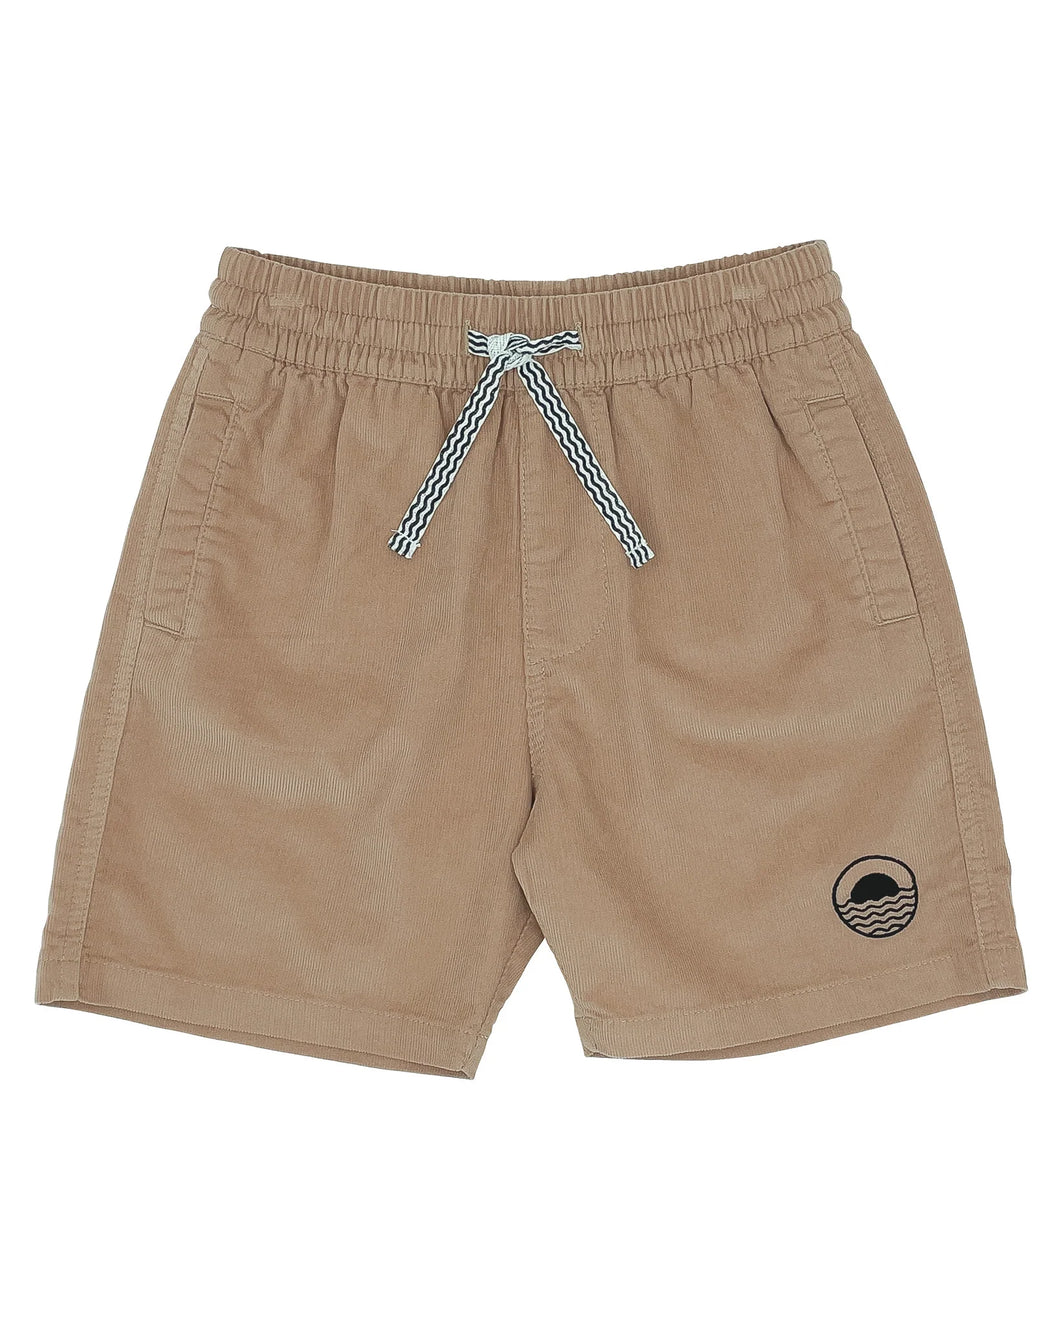 Feather 4 Arrow- Line Up Shorts- Burro (8-14)